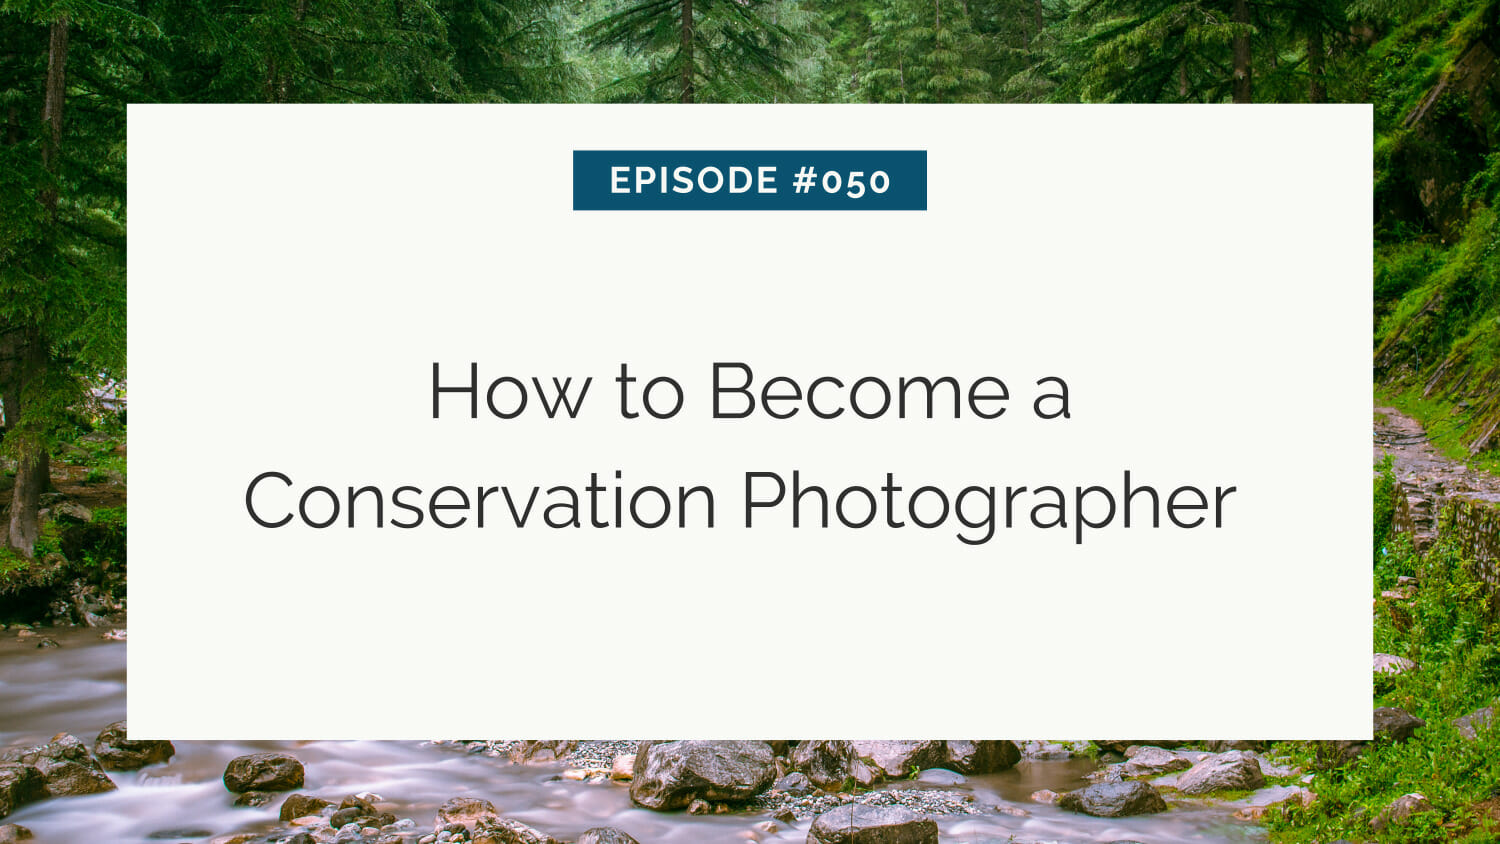 Title slide for episode #050: "how to become a conservation photographer" against a serene forest stream background.